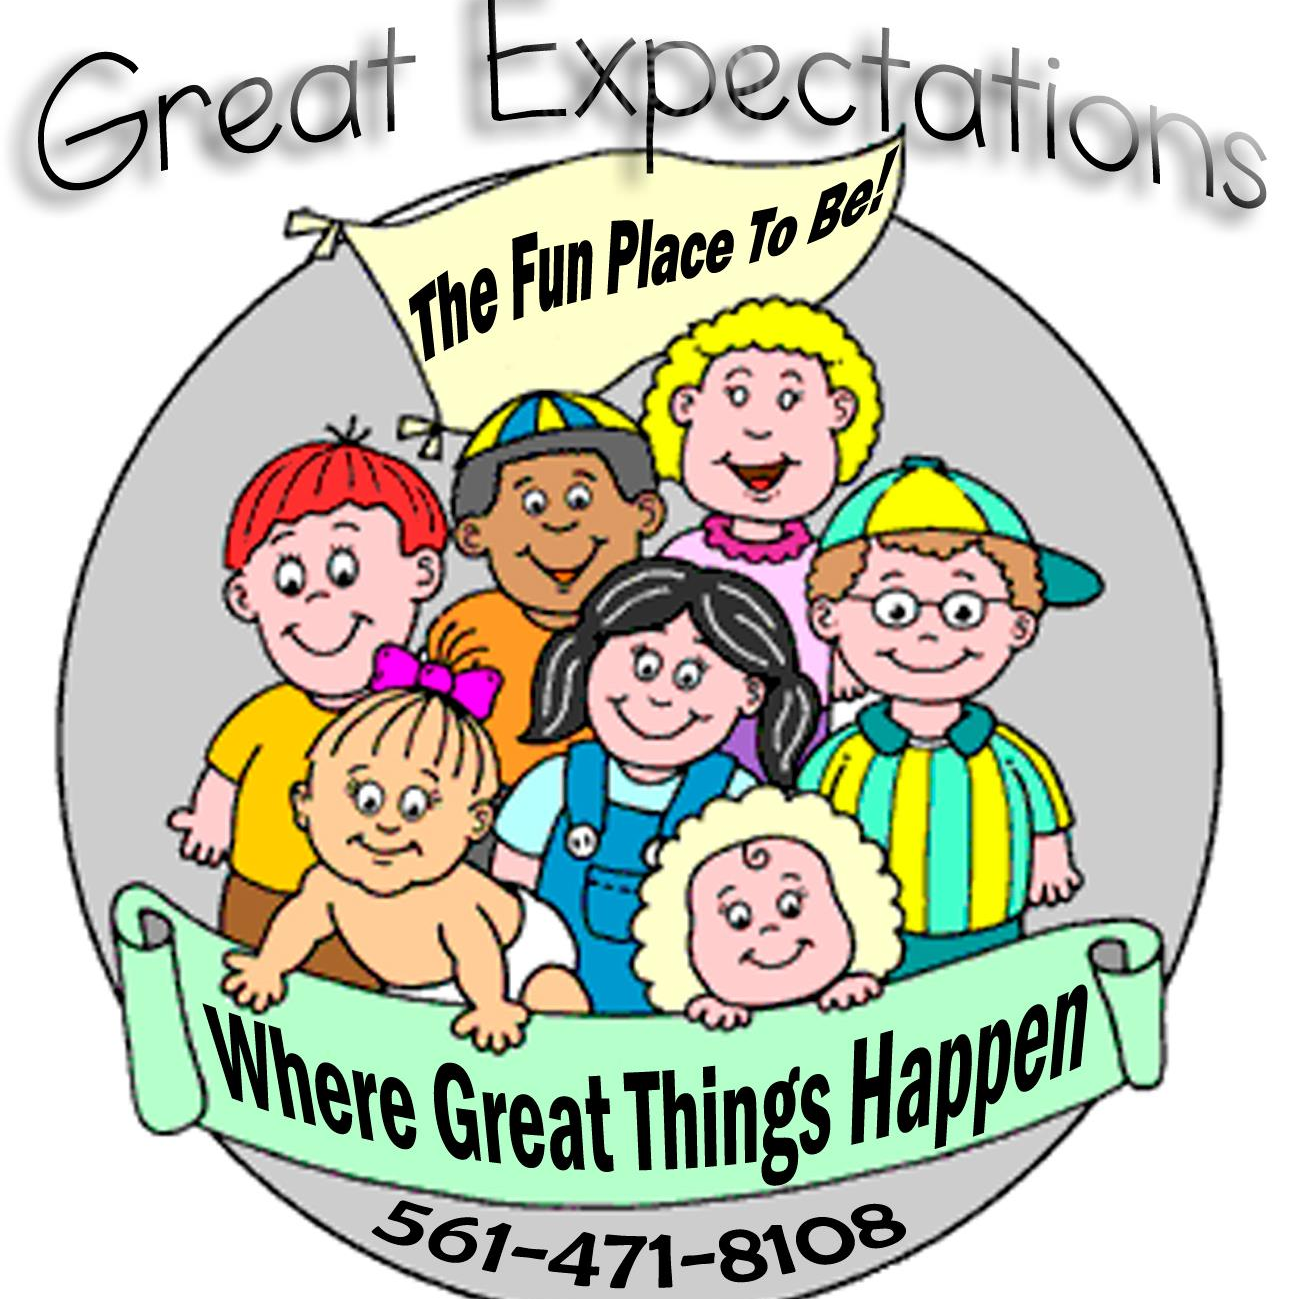 Great Expectations Childcare Corporation          